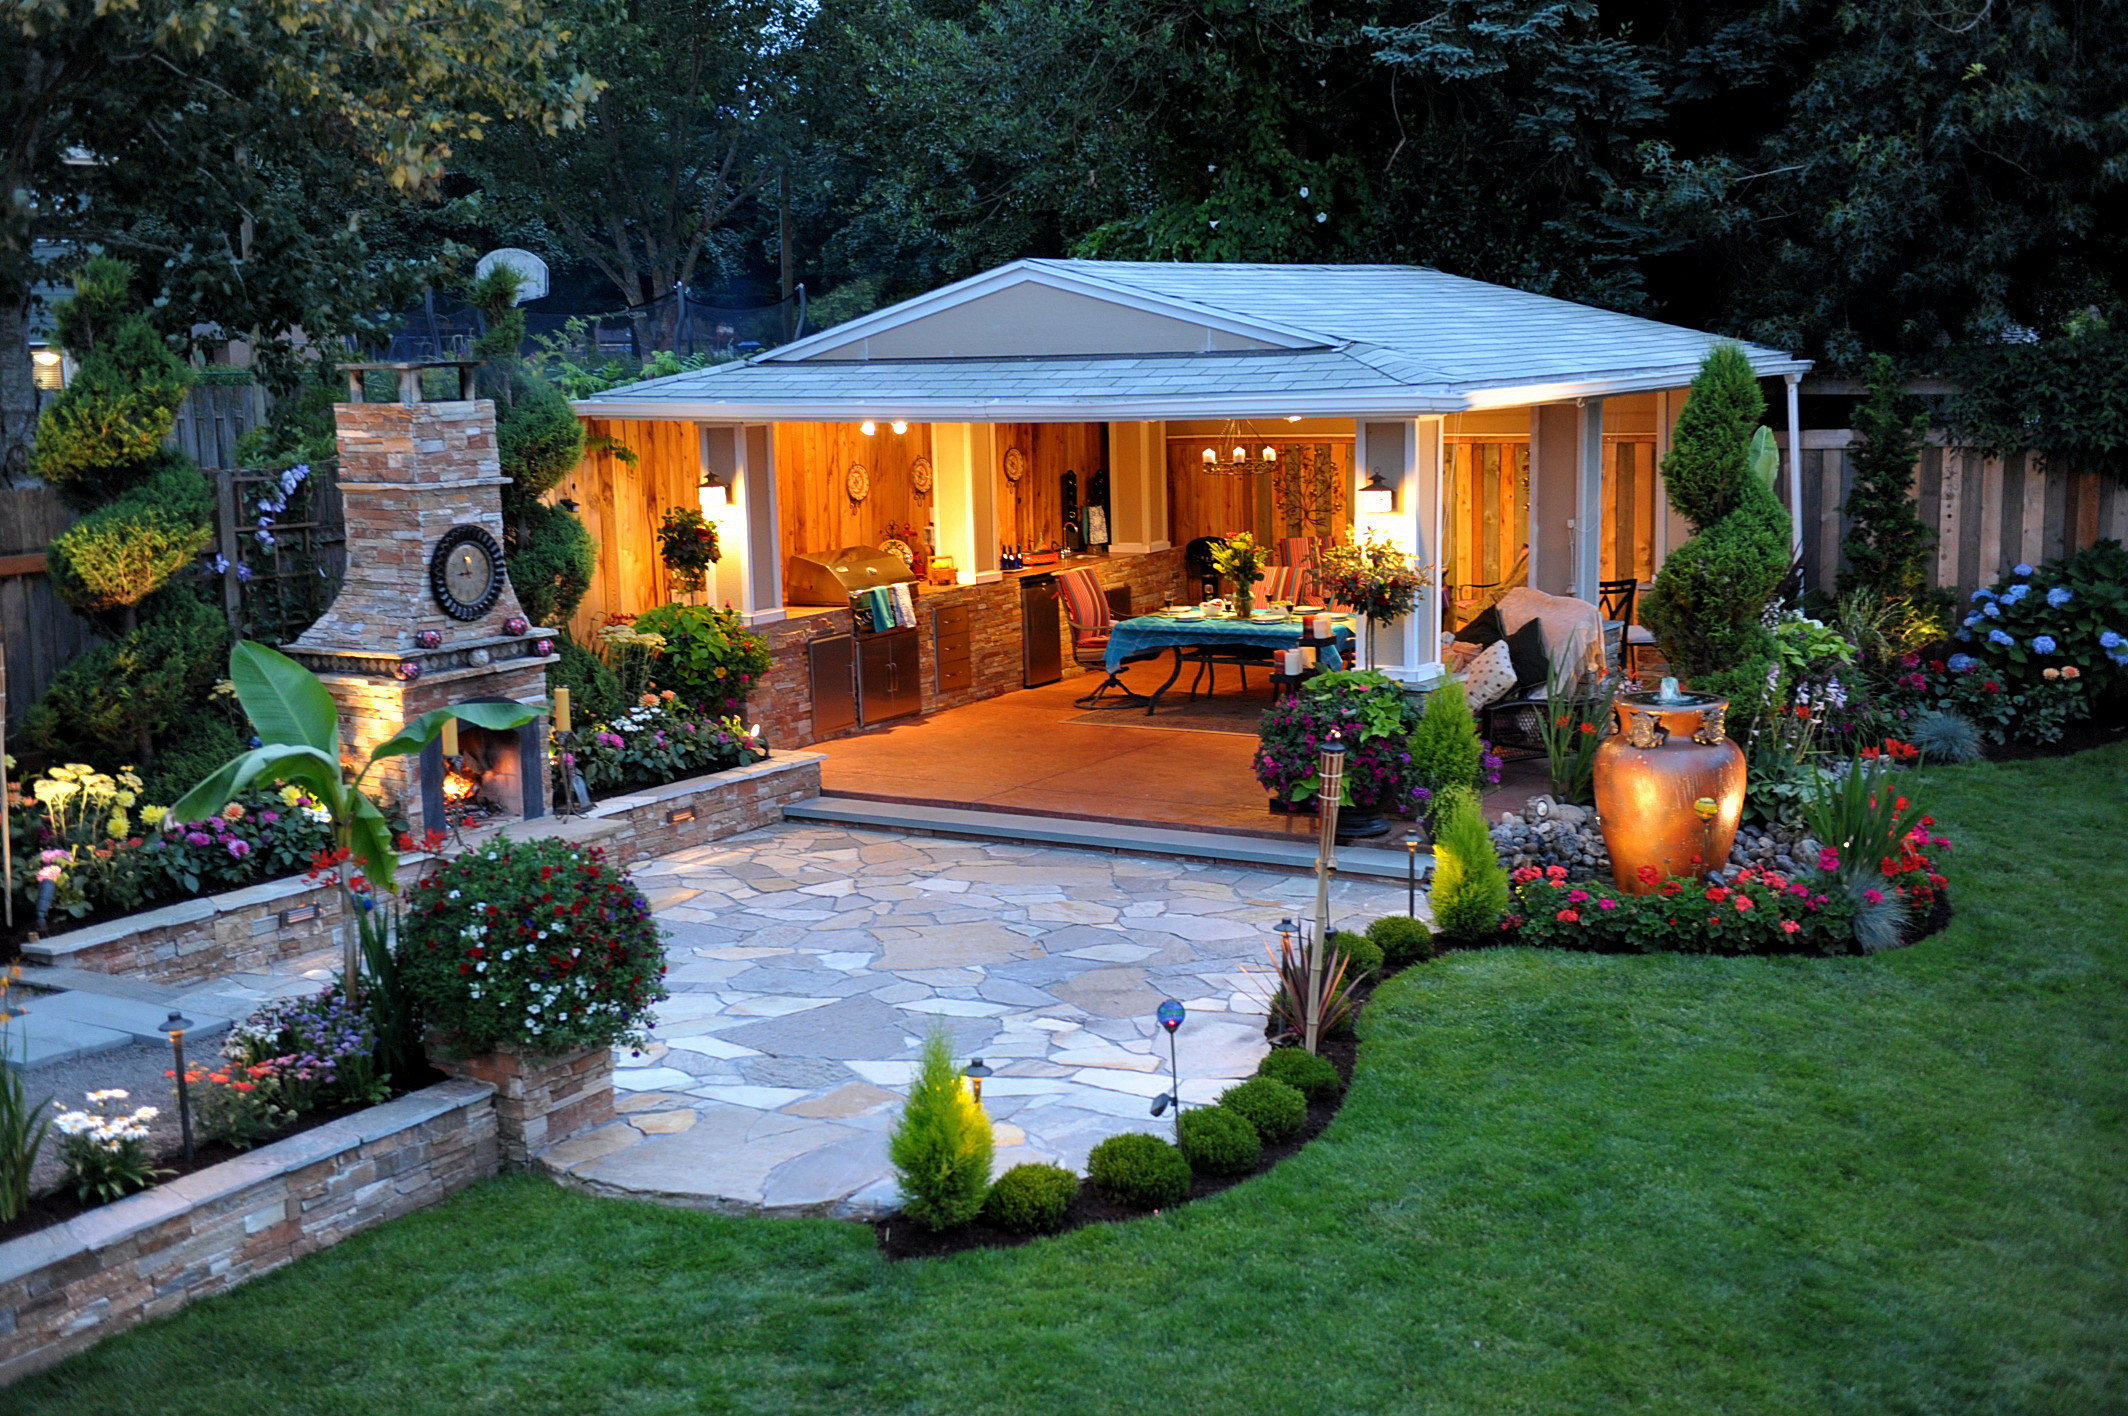 ... outdoor kitchen. Let us help you design your outdoor kitchen, patios